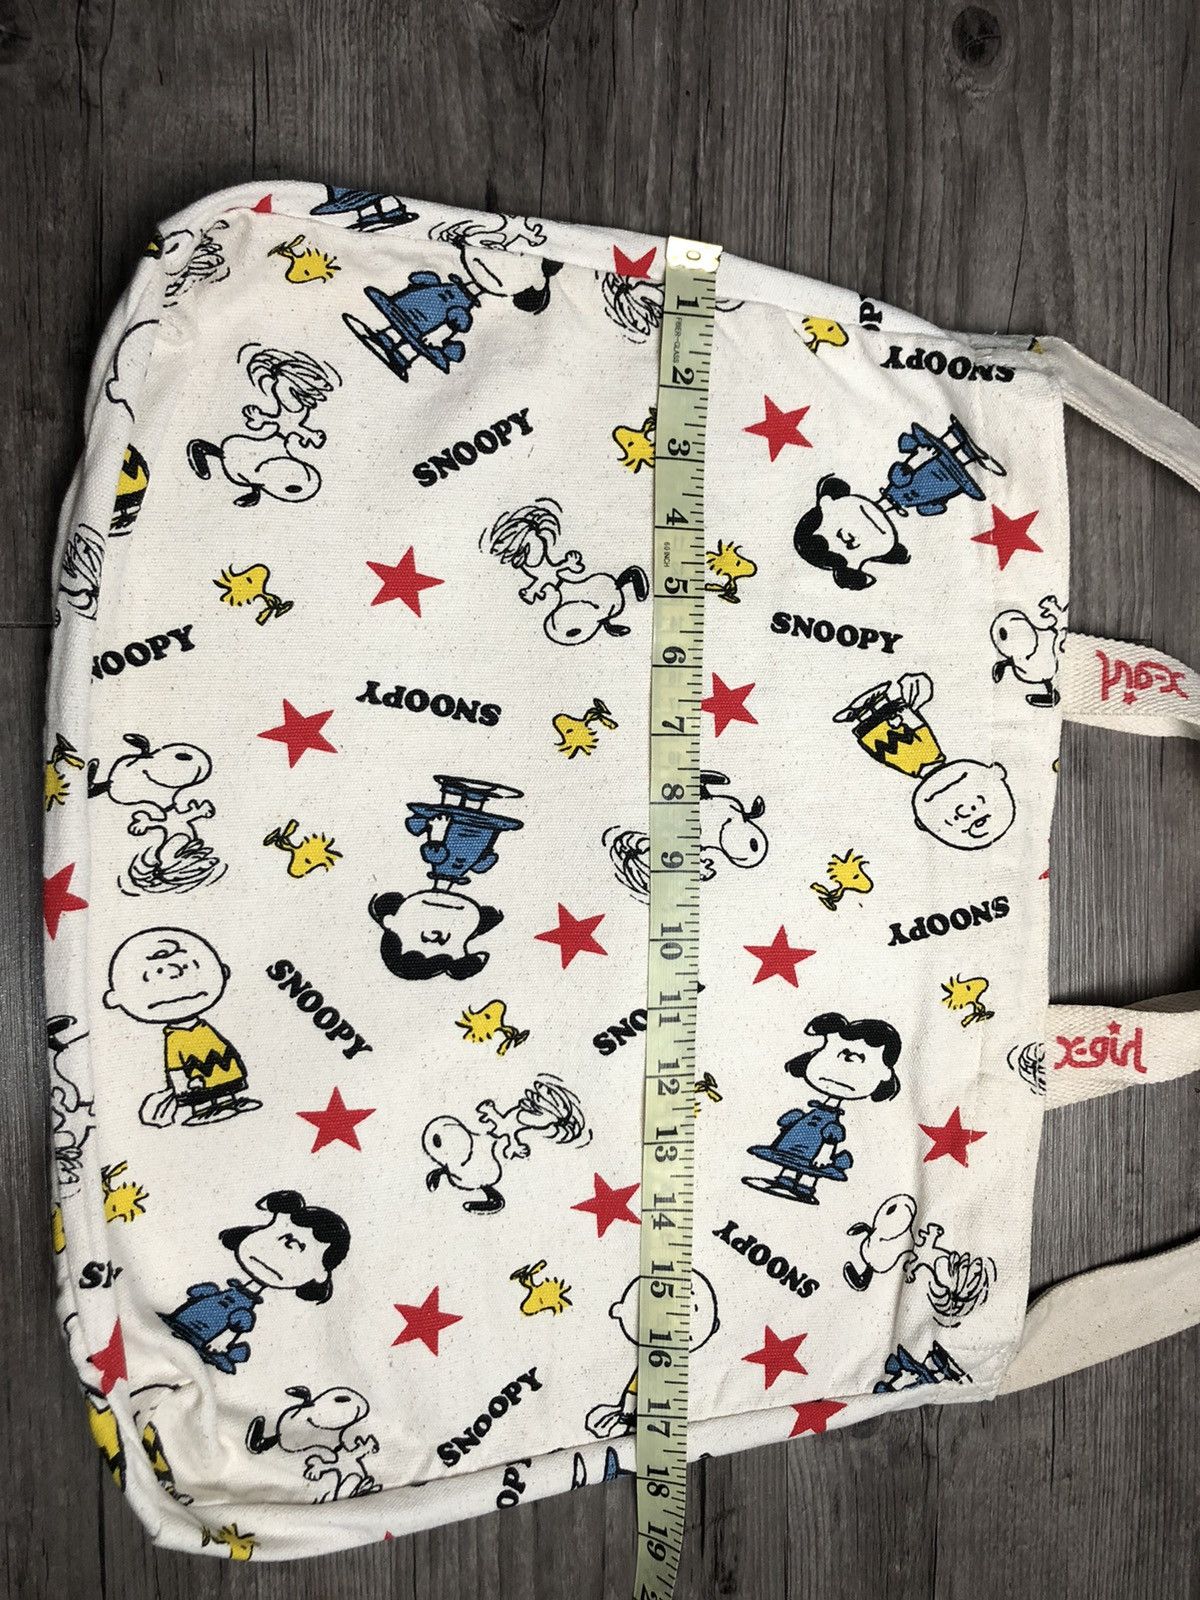 Vintage Peanuts x xgirl snoopy tote bag Size ONE SIZE - 7 Thumbnail